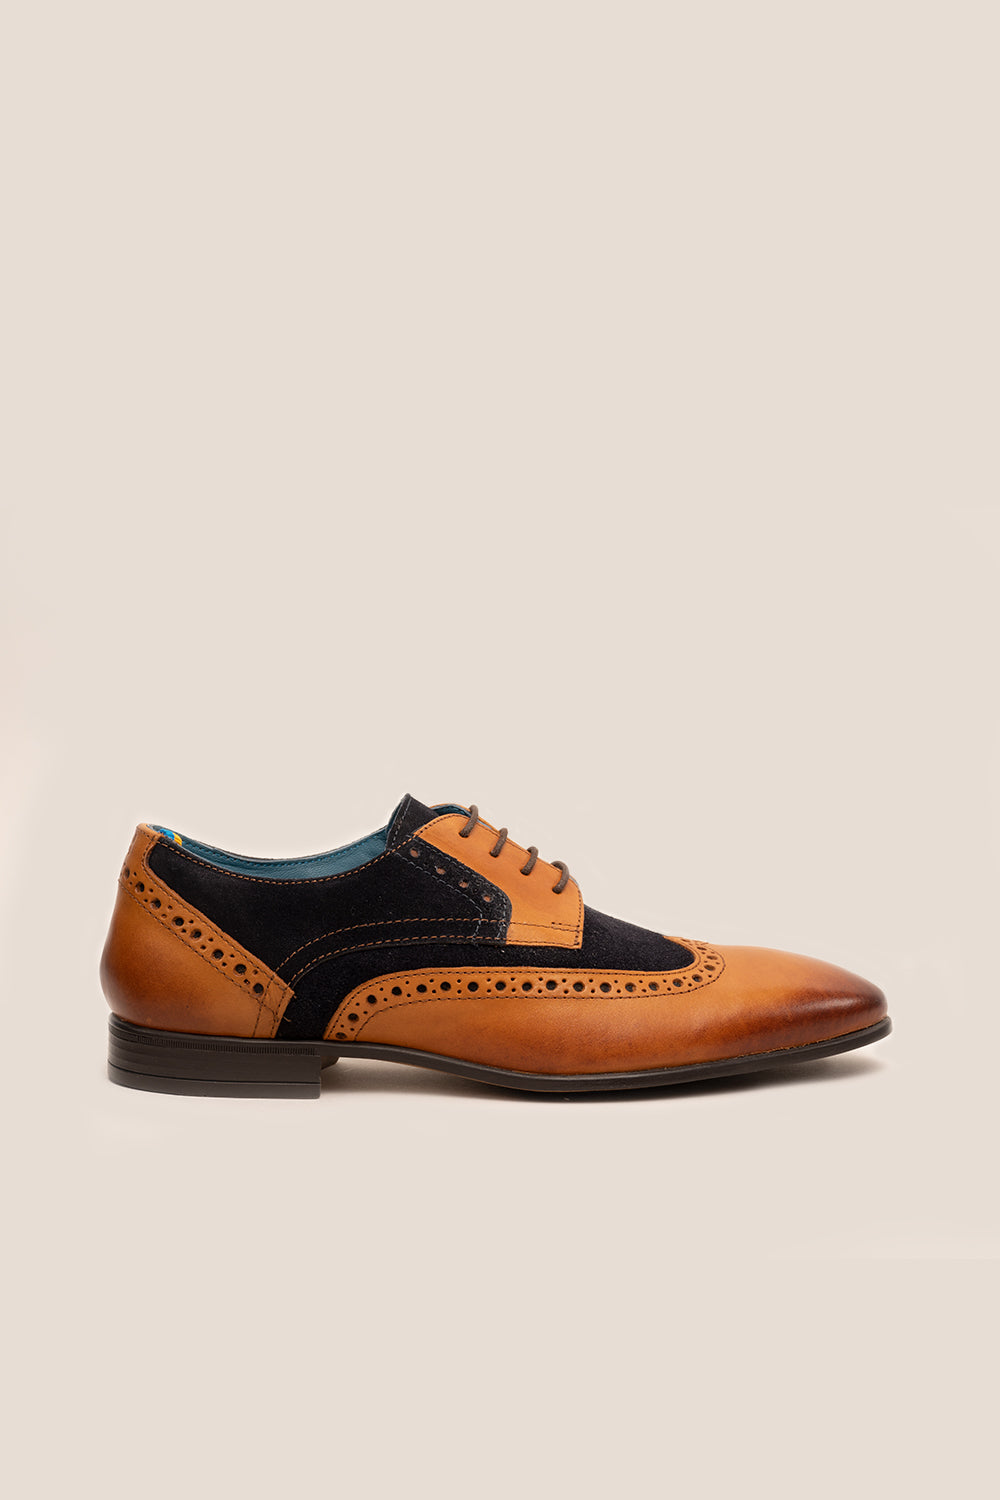 Miles Tan/Navy Leather/Suede Brogue Shoes Oswin Hyde